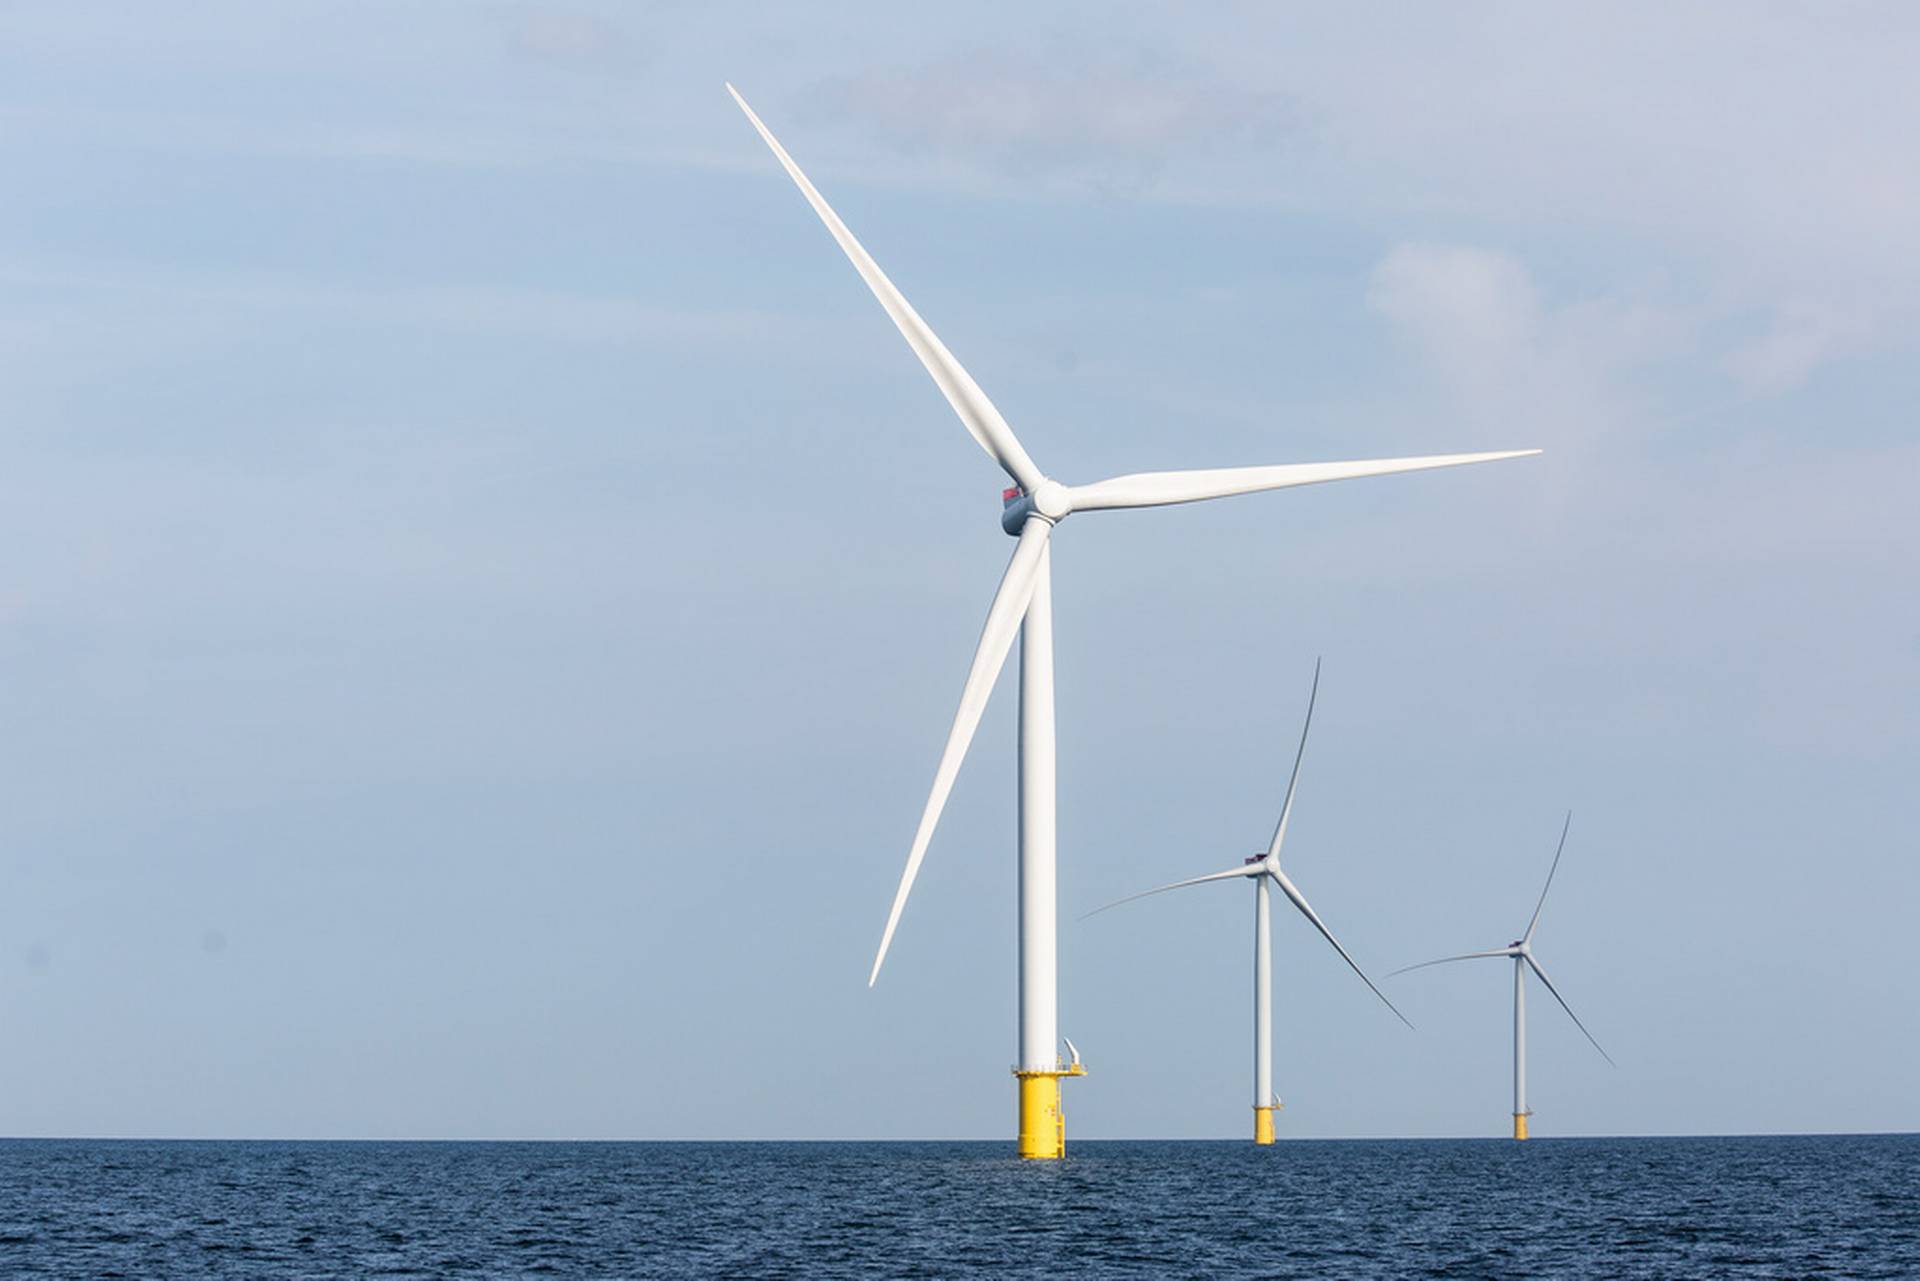 The government gives the green light for a large wind farm in the Baltic Sea